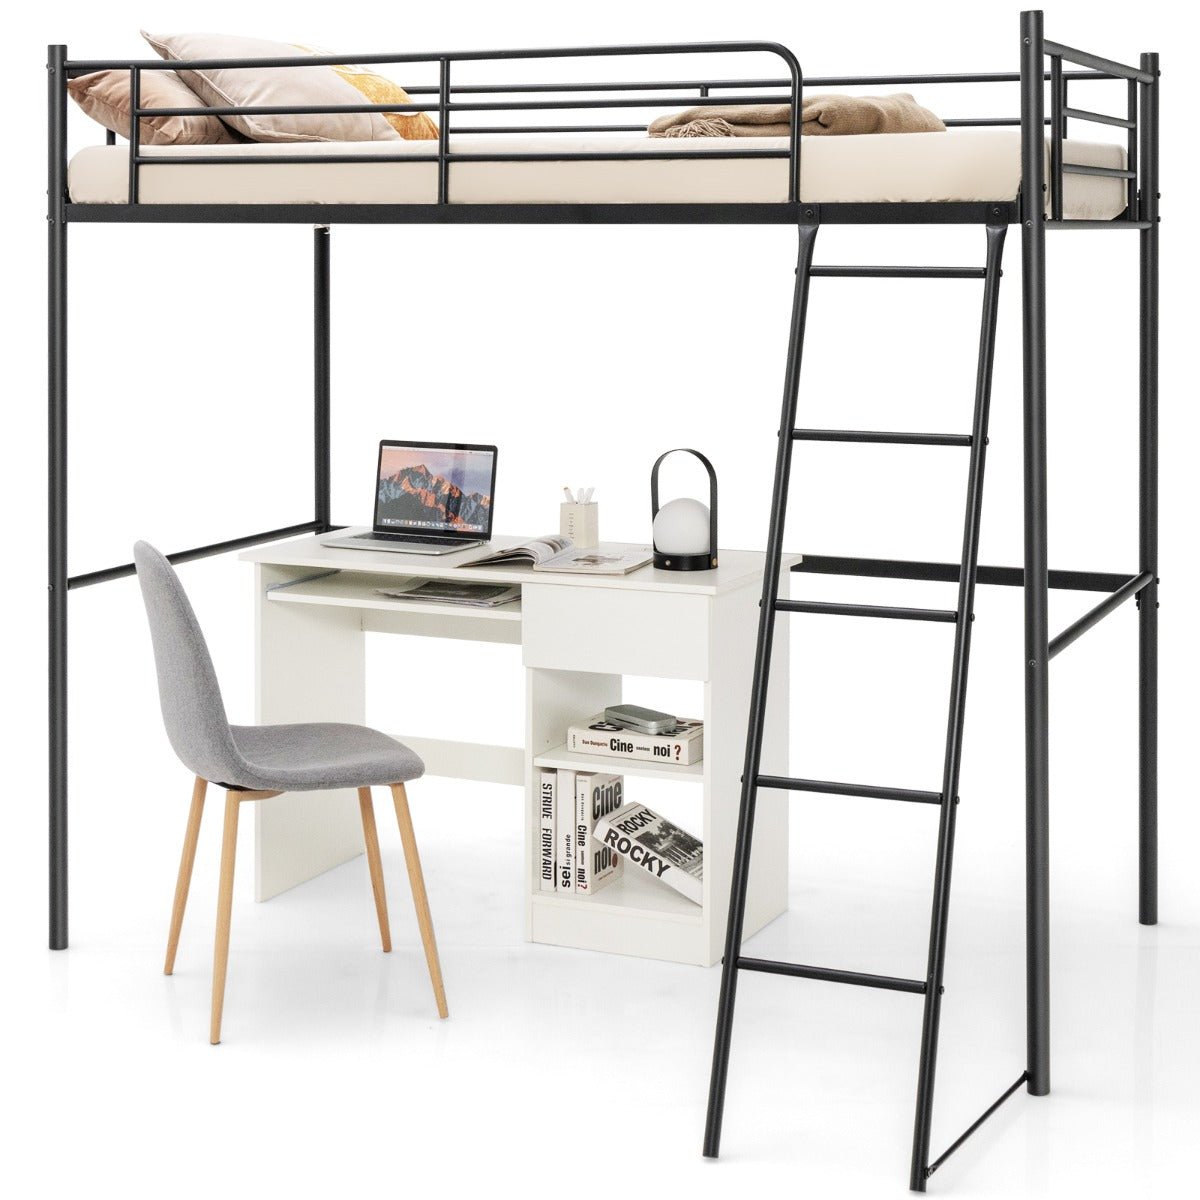 Heavy-duty Steel Bed Frame with High Guard Rails for Relaxation